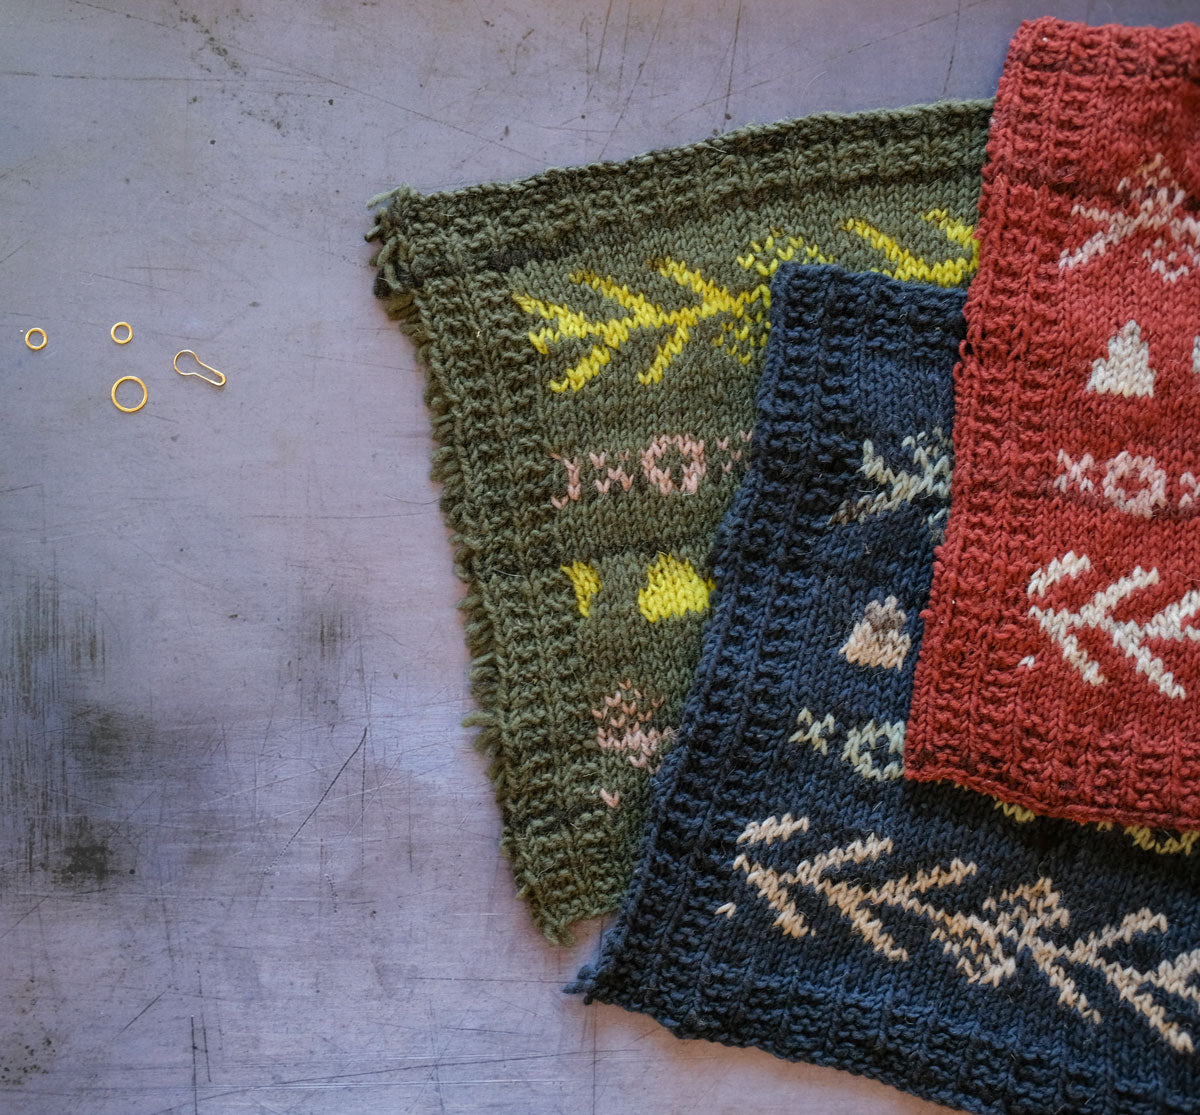 Three colorwork knitting swatches, red, navy and green, stacked on a grey background.